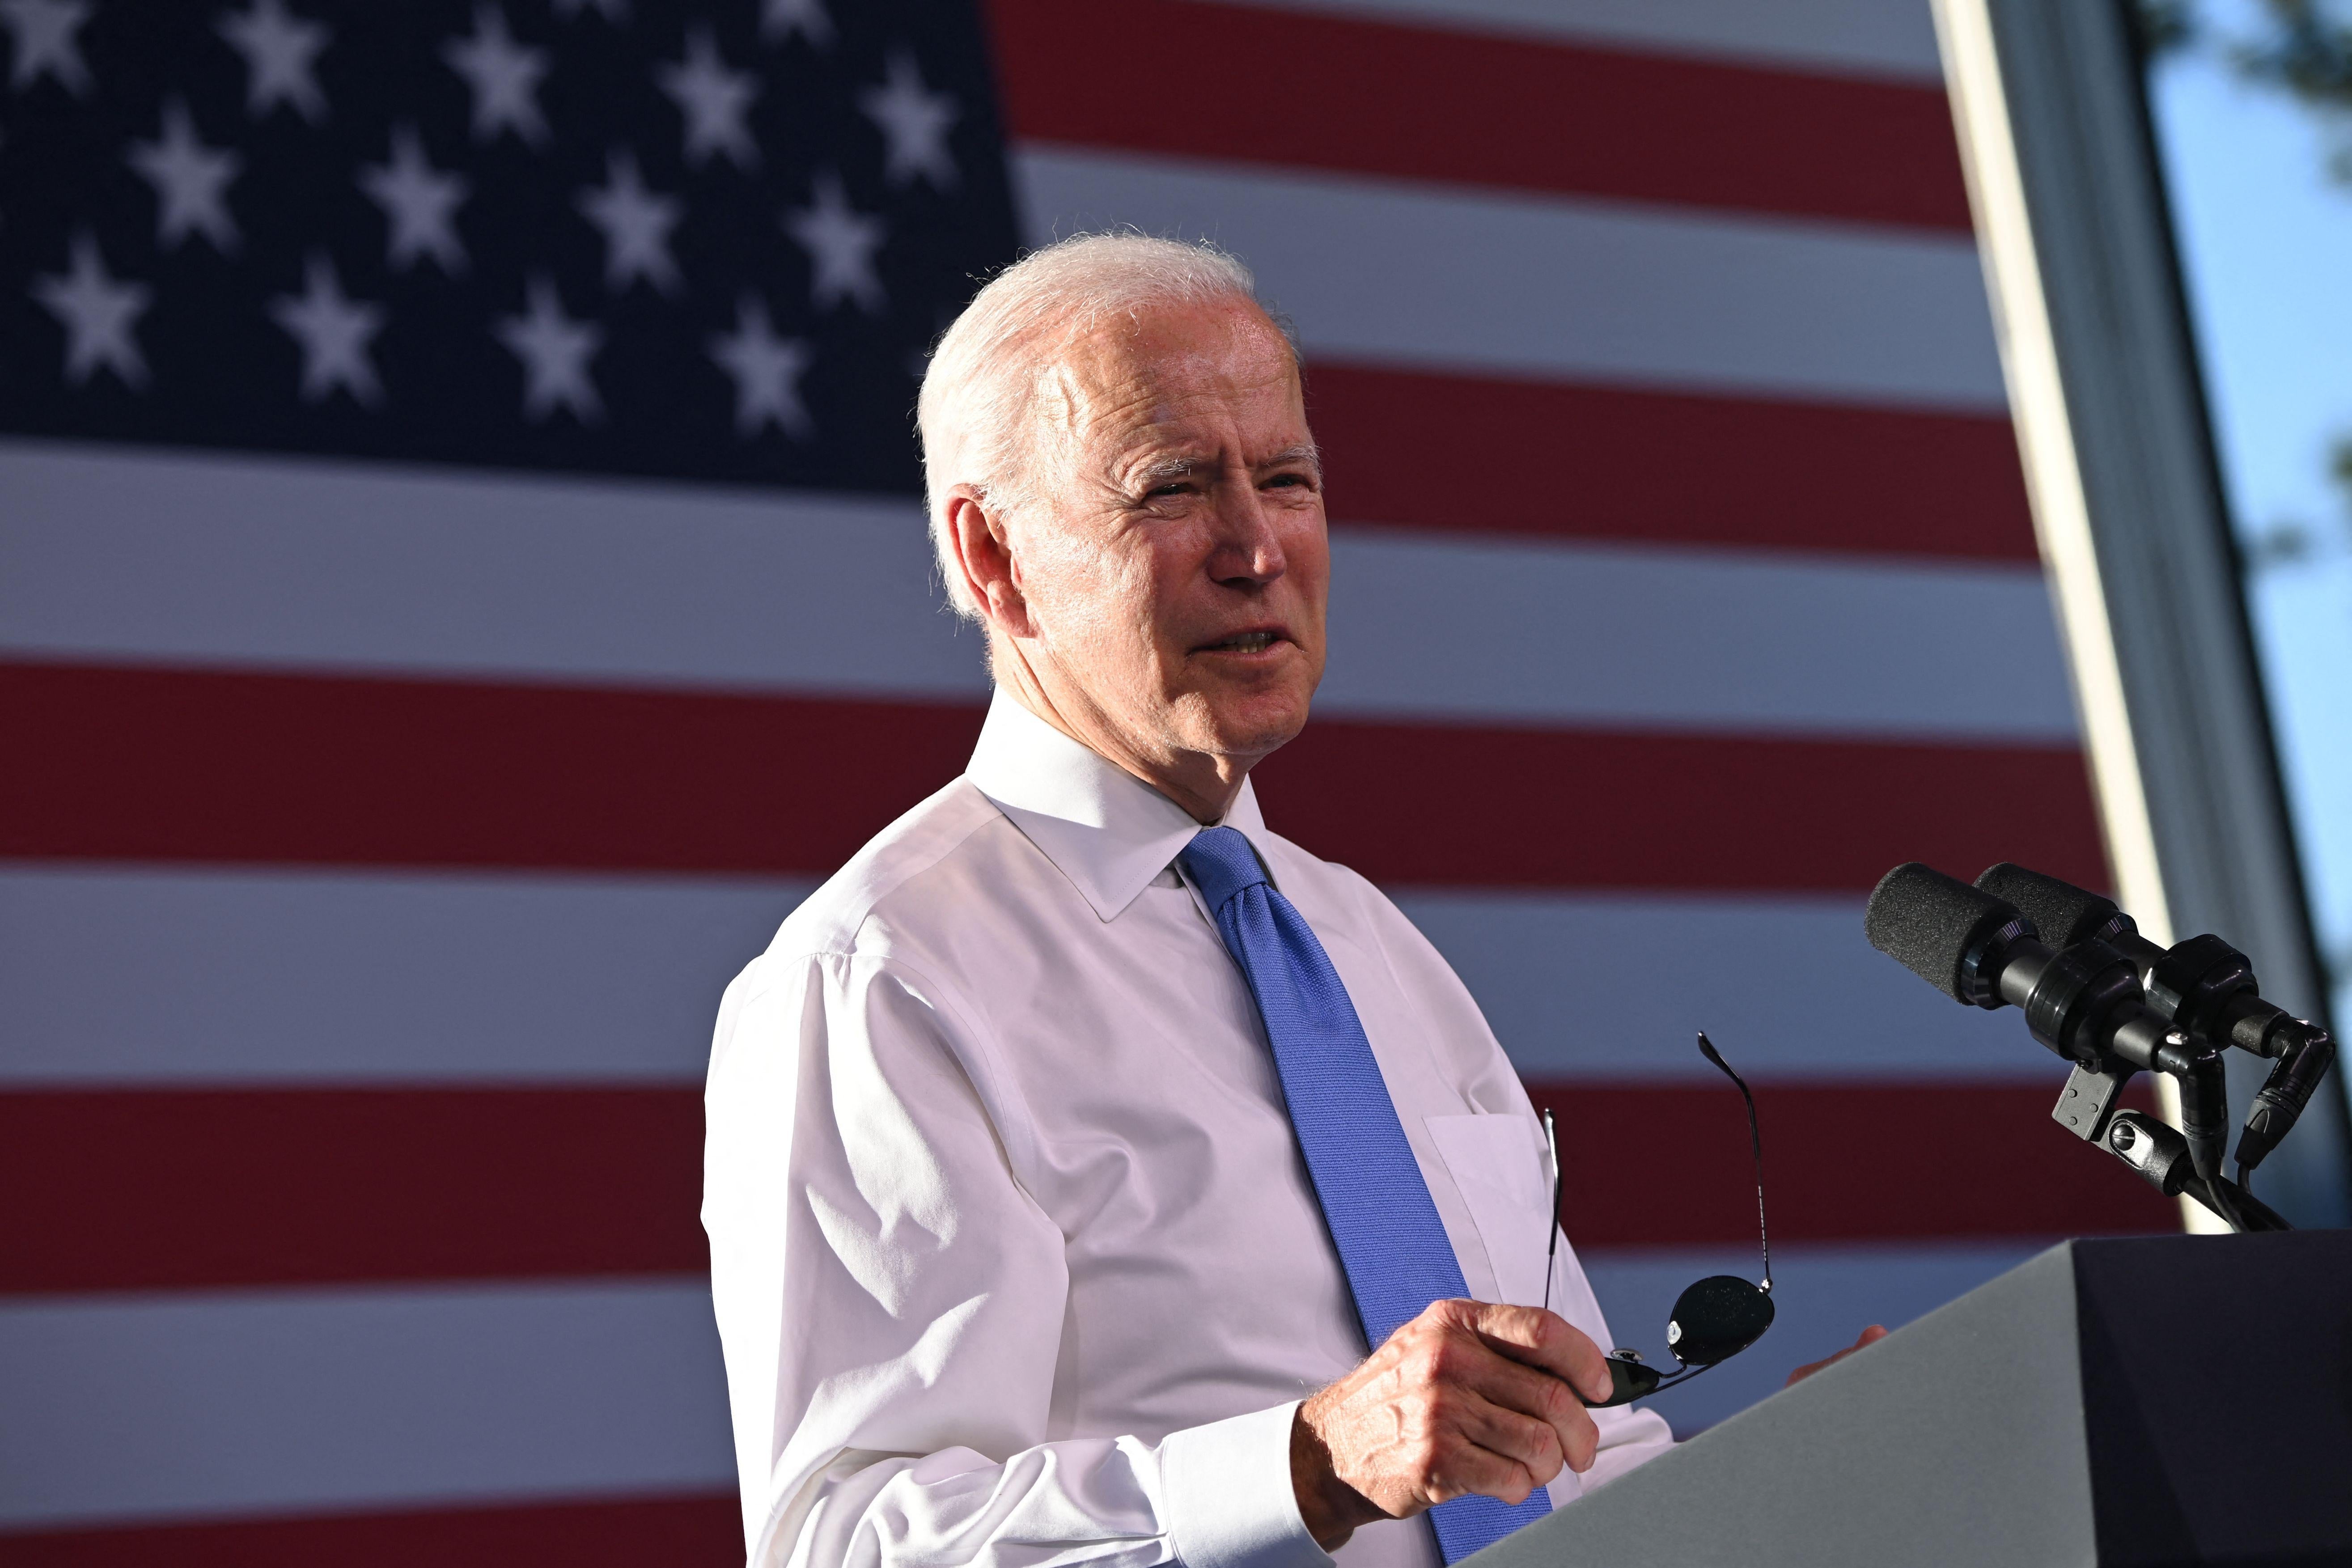 Joe Biden standing at a lectern in front of an American flag, holding his aviator sunglasses.